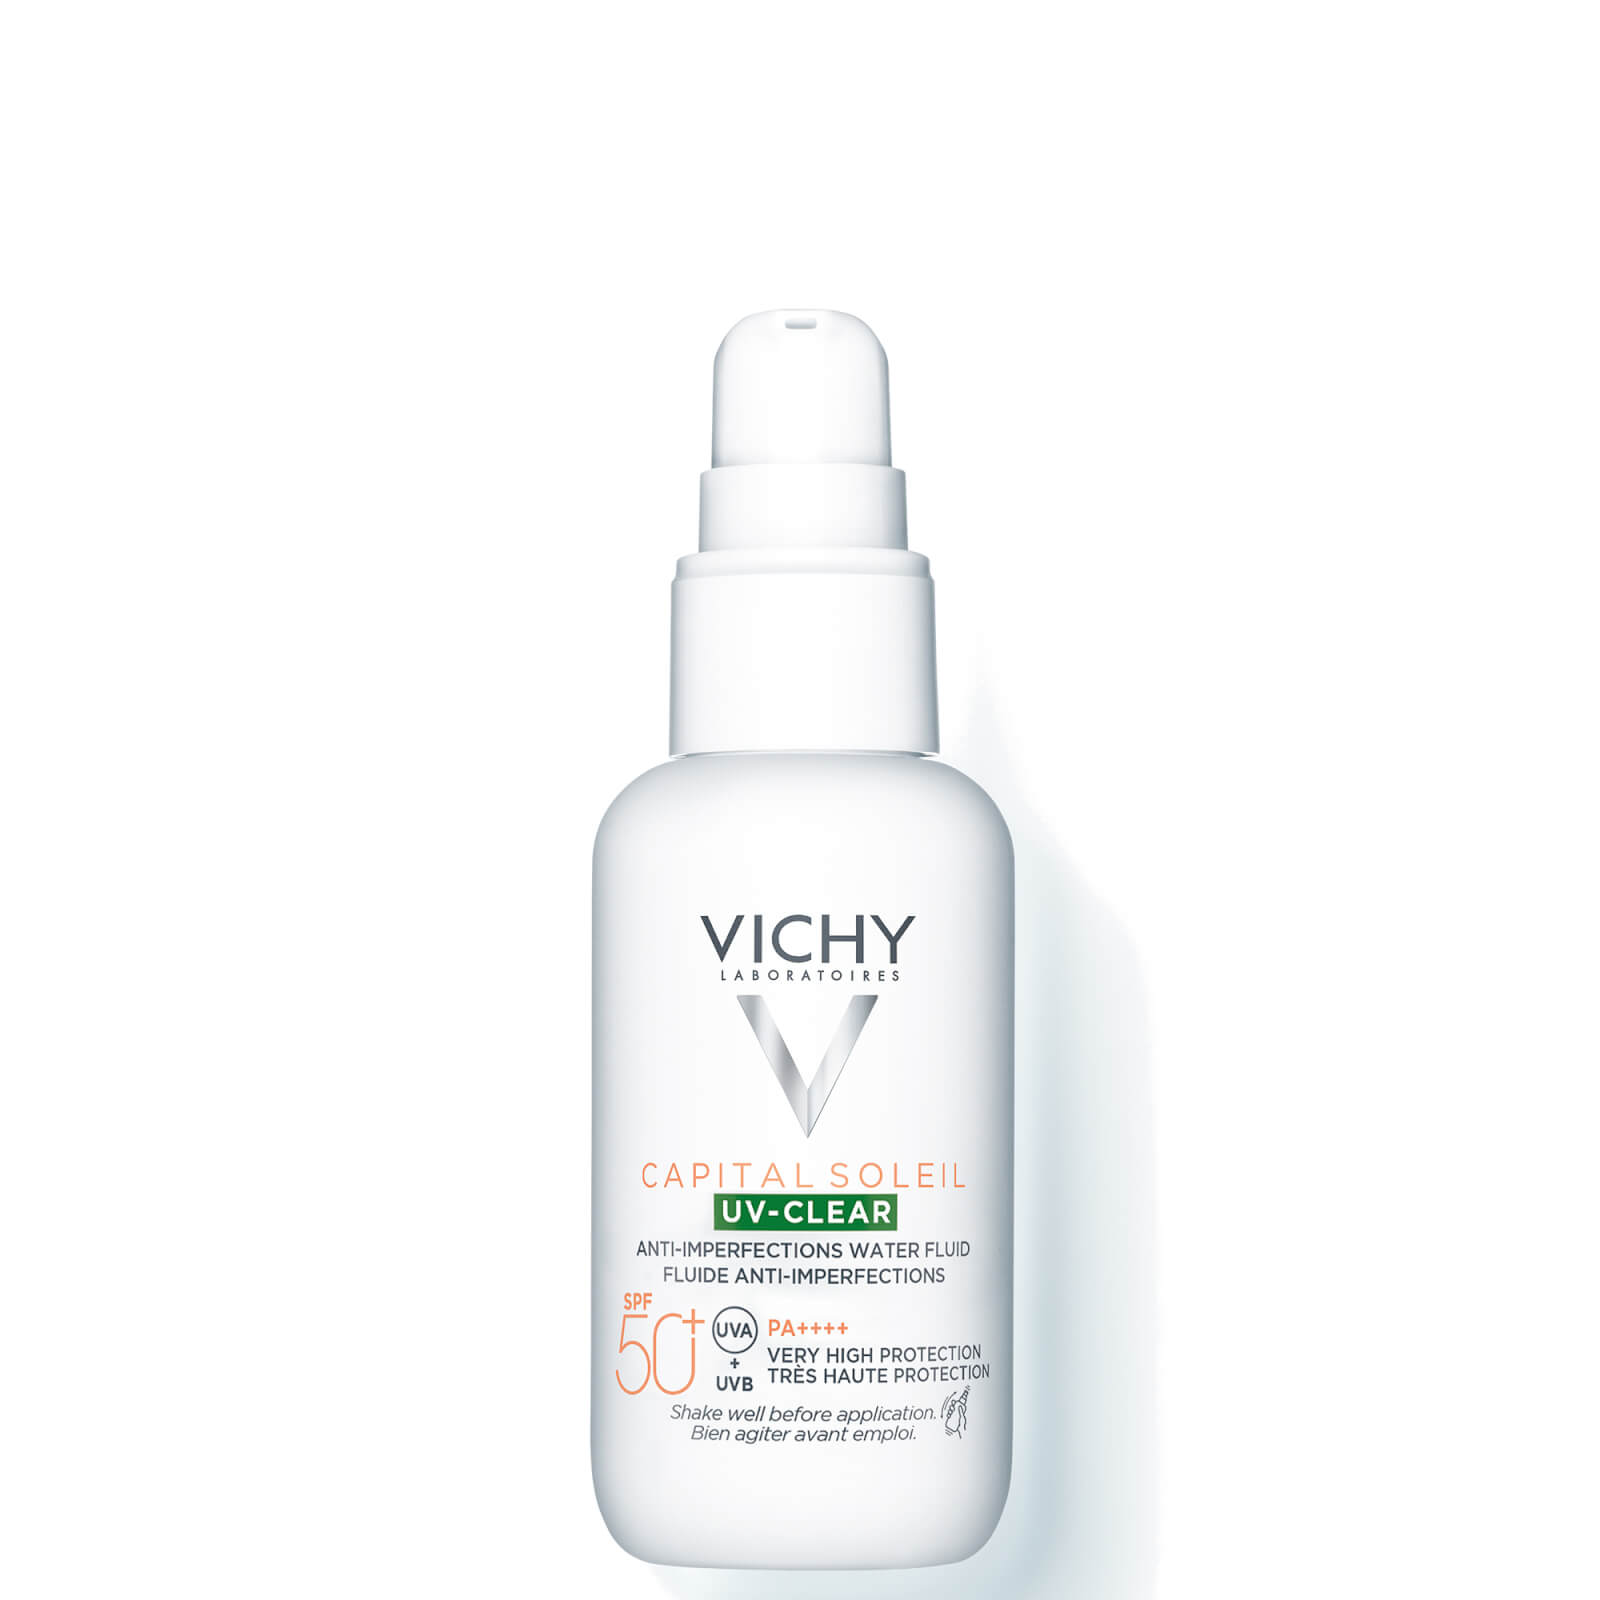 Vichy Capital Soleil UV-Clear Daily Sun Protection SPF50+ with Salicylic Acid for Blemish-Prone Skin